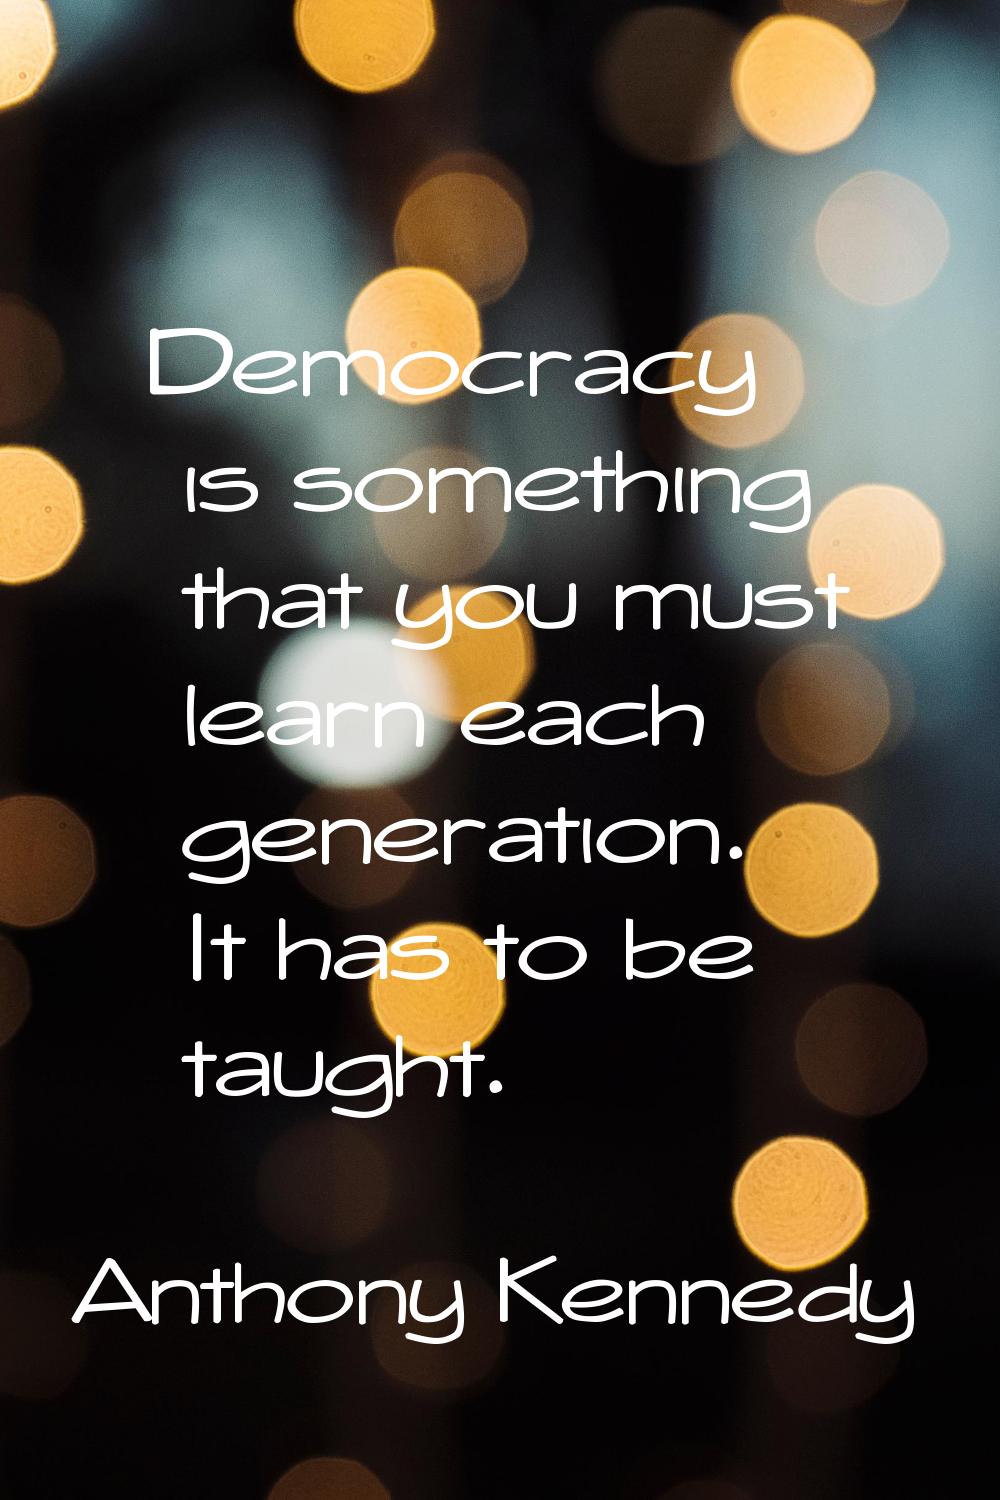 Democracy is something that you must learn each generation. It has to be taught.